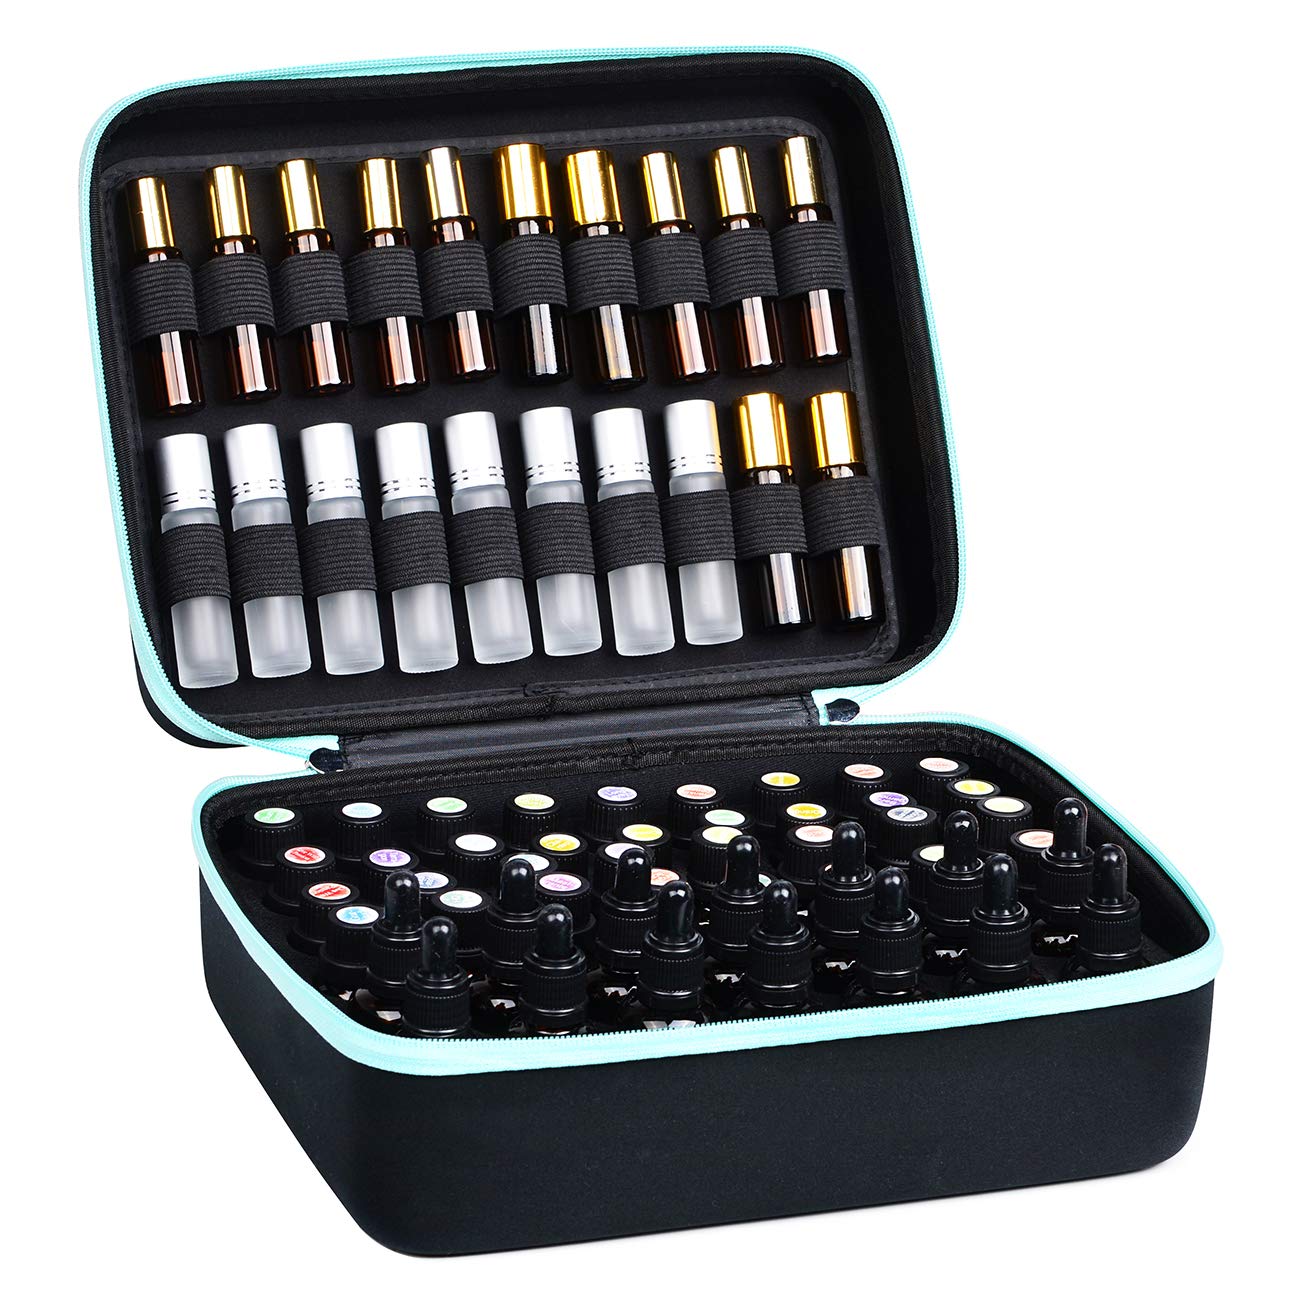 BES CHAN Essential Oil Carrying Organizer Storage Case (Carry Handle On Top) Holds 48-68 Small Bottle Box/Roller Bottles for 5ml 10ml 15ml 20ml 30ml /1oz with Free Writable Labels Opener